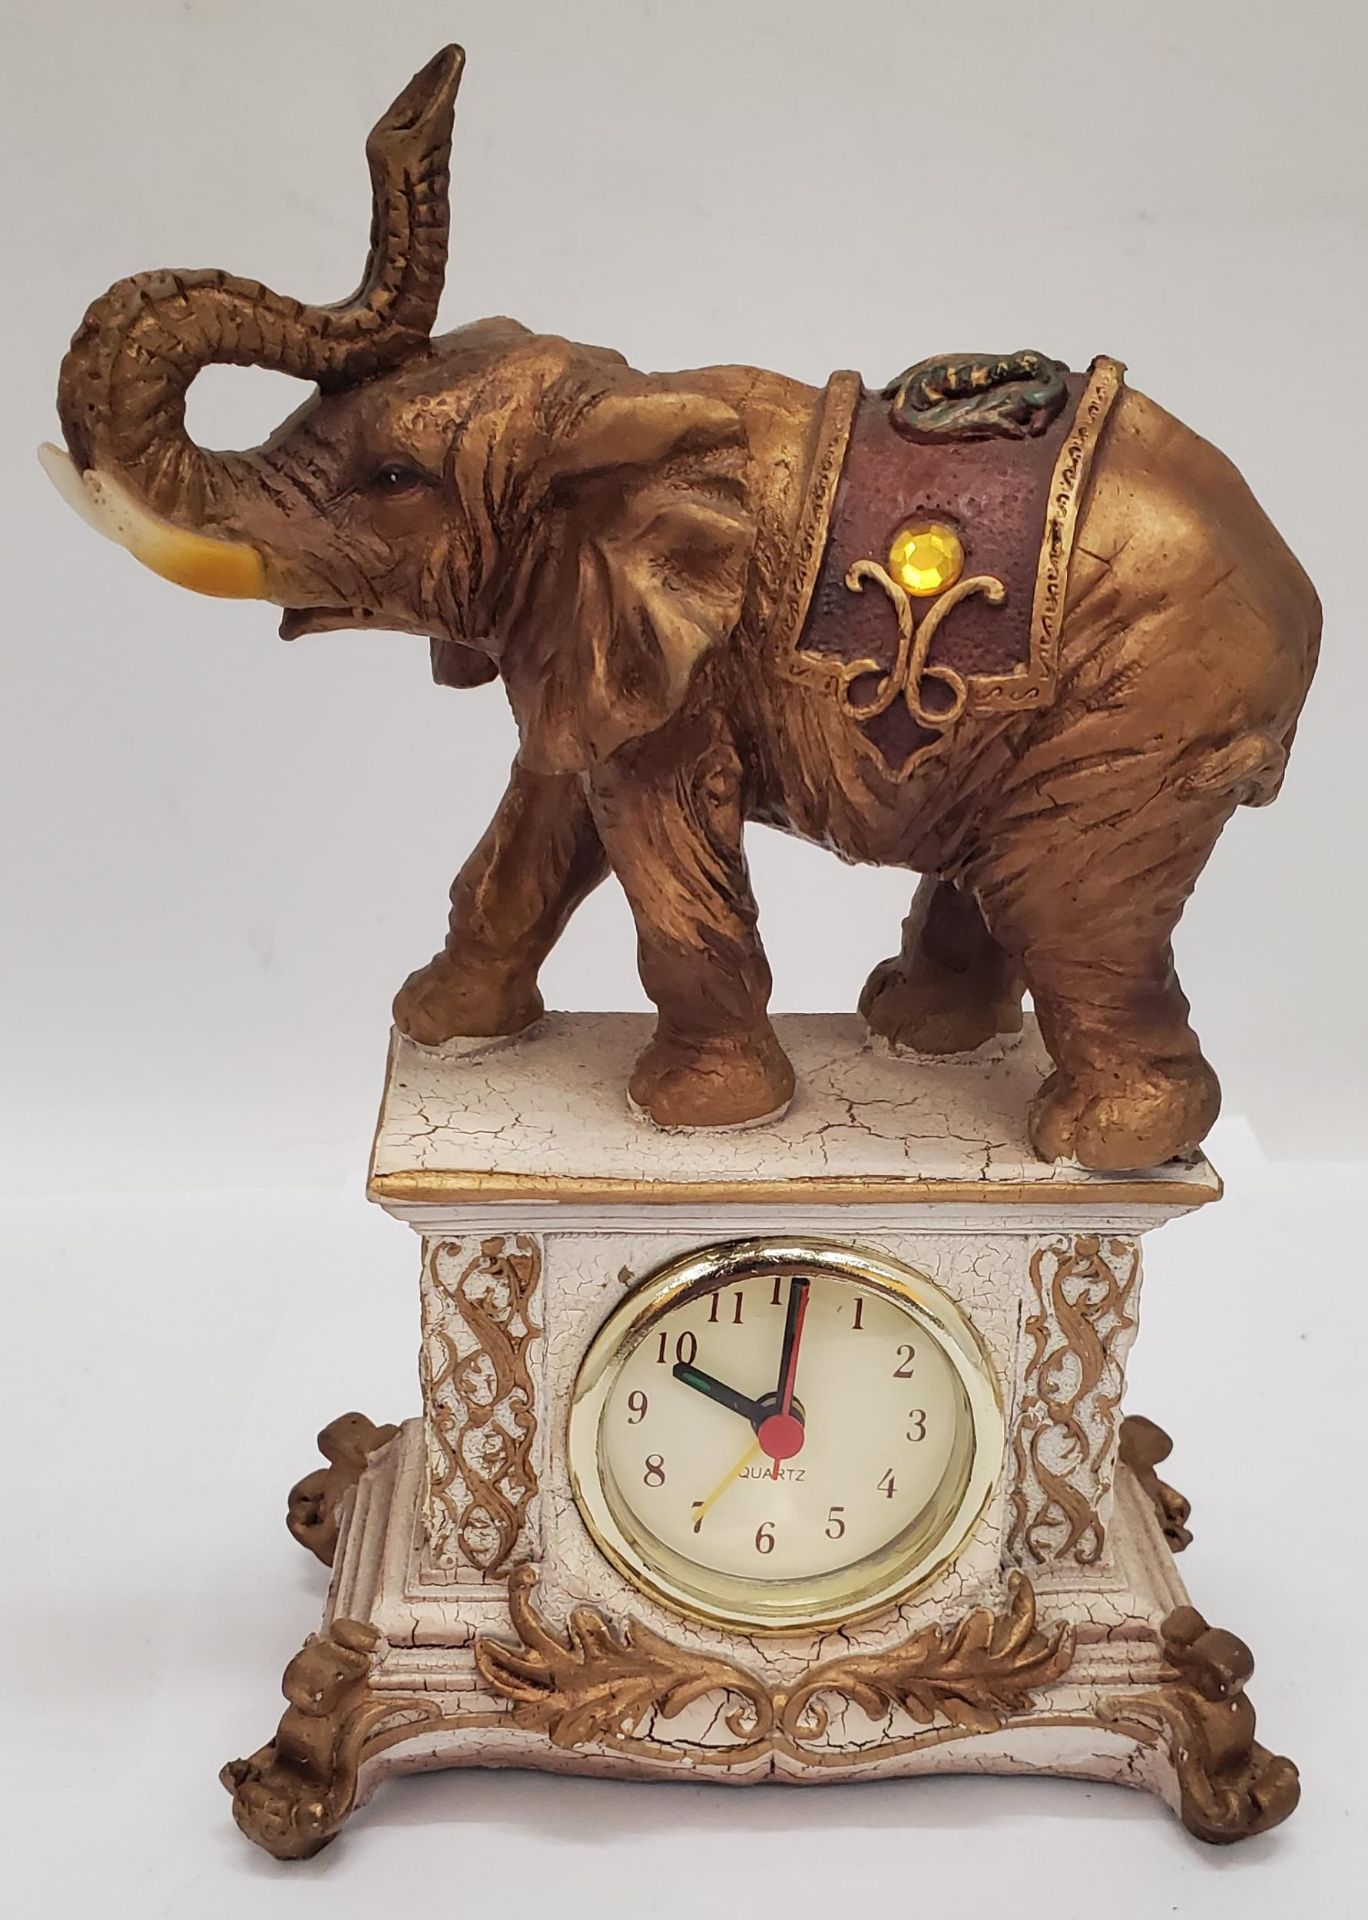 A VINTAGE ST. JAMES BRASS CARRIAGE CLOCK PLUS A MANTLE CLOCK WITH AN ELEPHANT ON TOP - Image 2 of 5